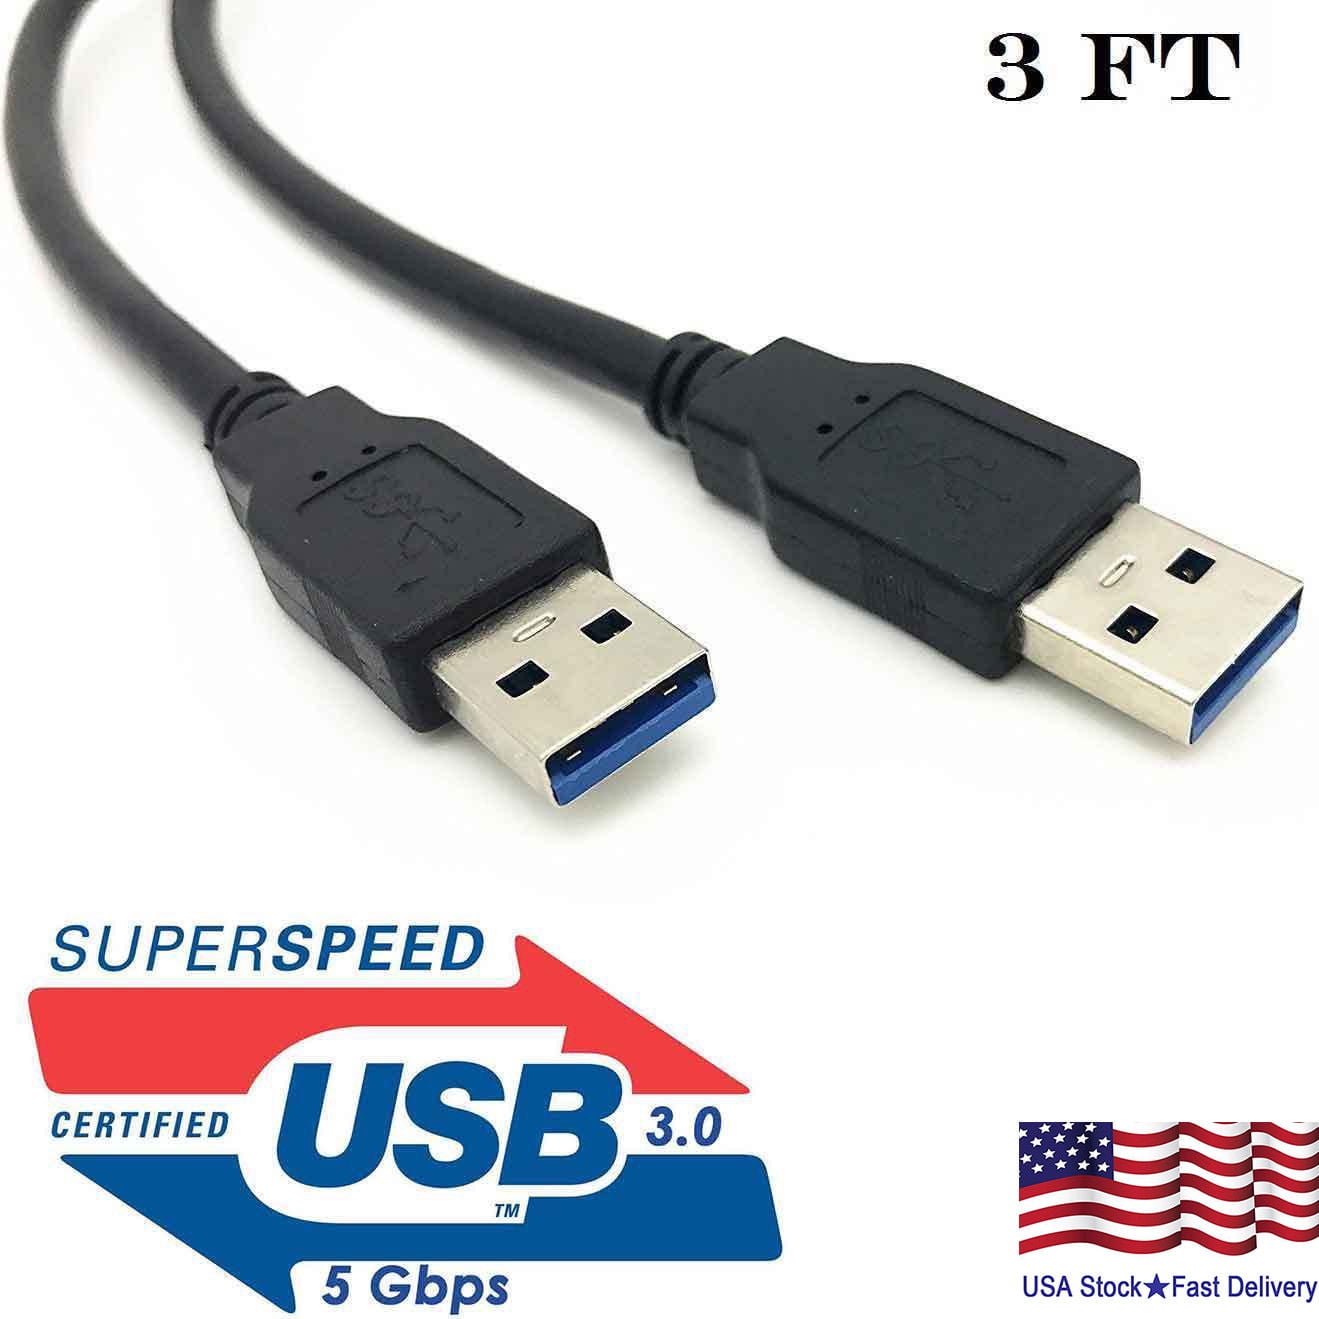 30cm,S1-S2 ADT-Link USB 3.0 Cable USB to USB Cable Type A Male to Male Extension Cable Super Speed HDD 90/270 Degree Angle Up/Down Angled 